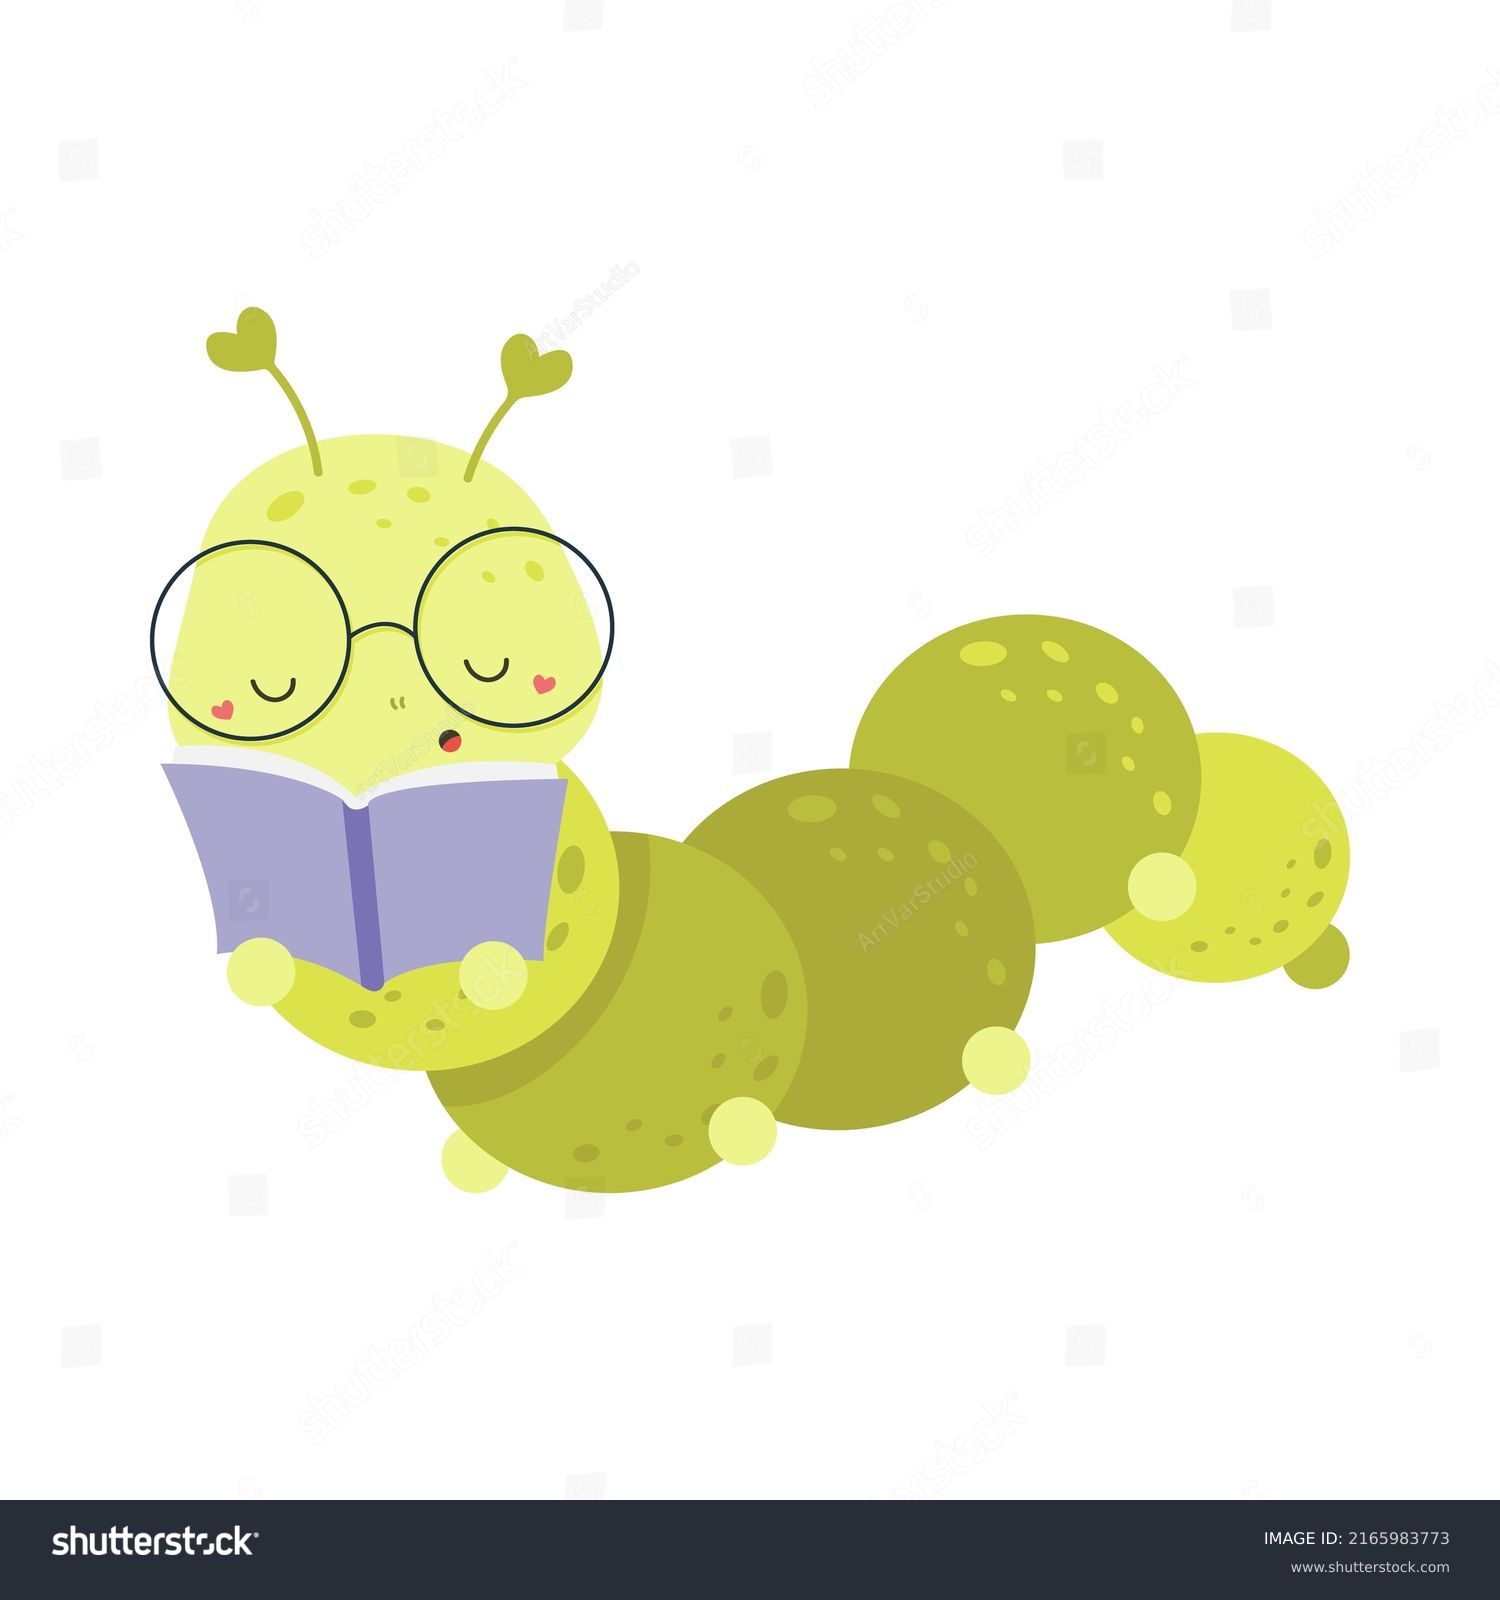 SVG of Cute Caterpillar Clipart Isolated on White Background. Funny Clip Art Caterpillar Reading a Book. Vector Illustration of an Animal for Coloring Pages, Stickers, Baby Shower, Prints for Clothes.  svg